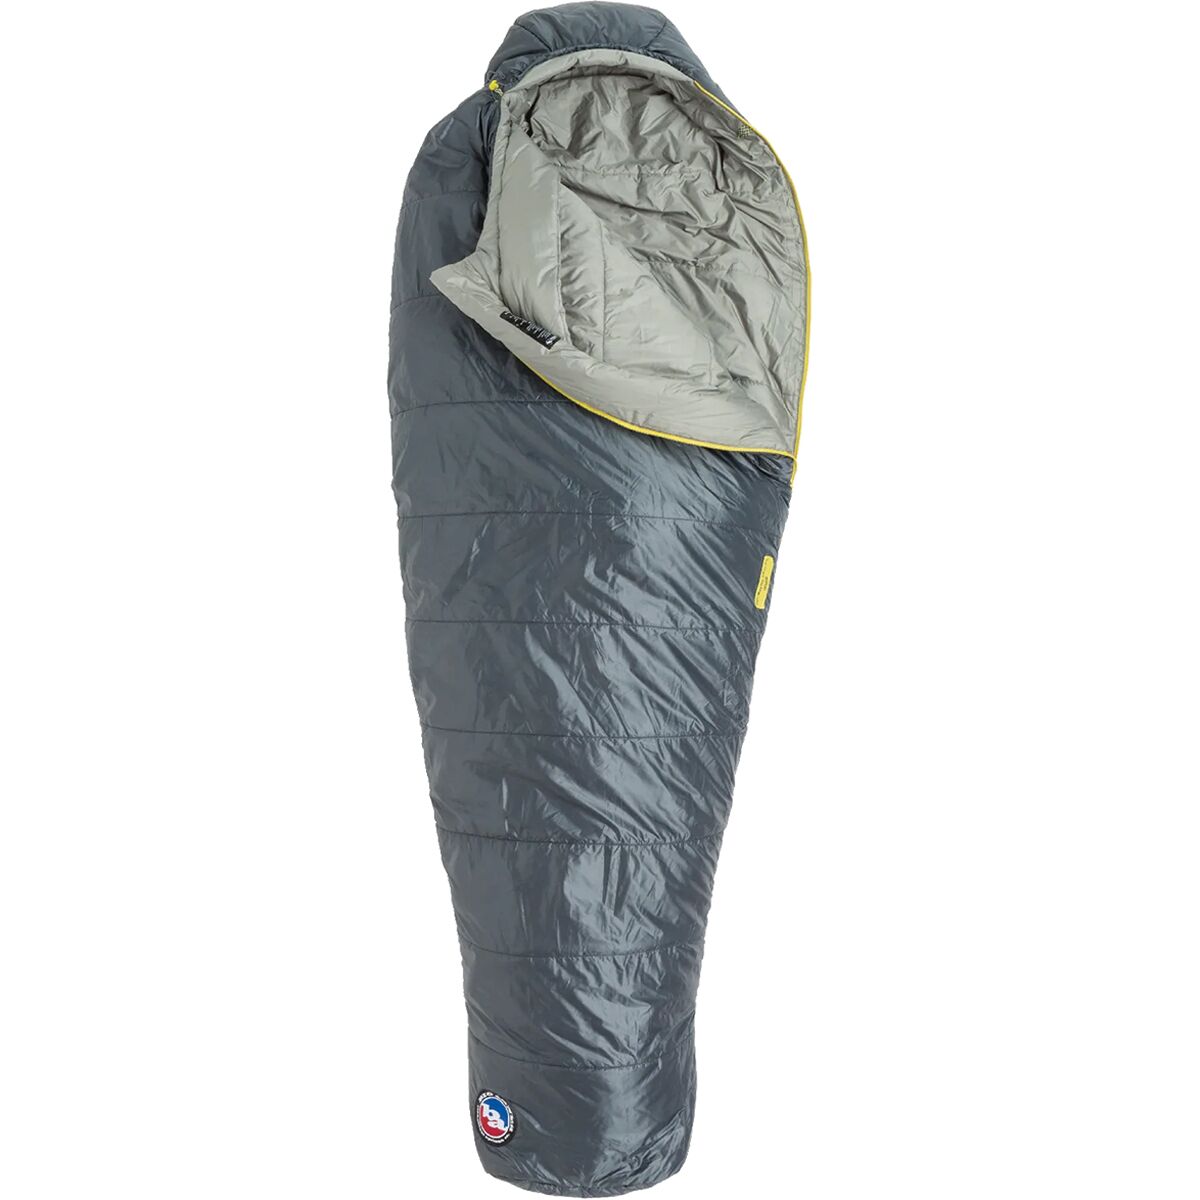 Big Agnes Anthracite 30 FireLine Pro Recycled Sleeping Bag